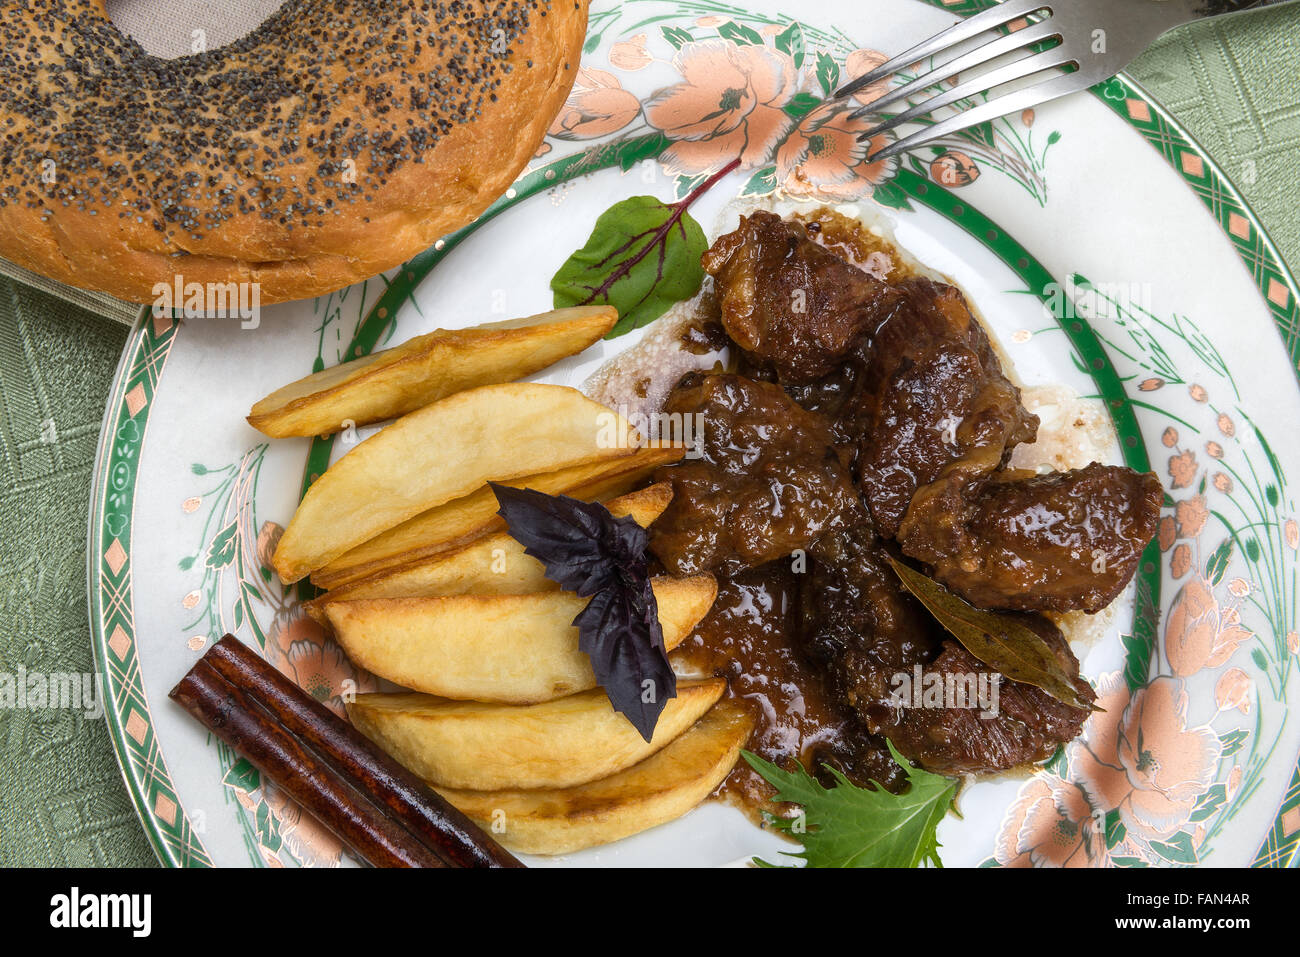 Esik fleisch - A traditional Ashkenazim Jewish dish made of beef, braised in sour-sweet sauce with damson plums and spices Stock Photo